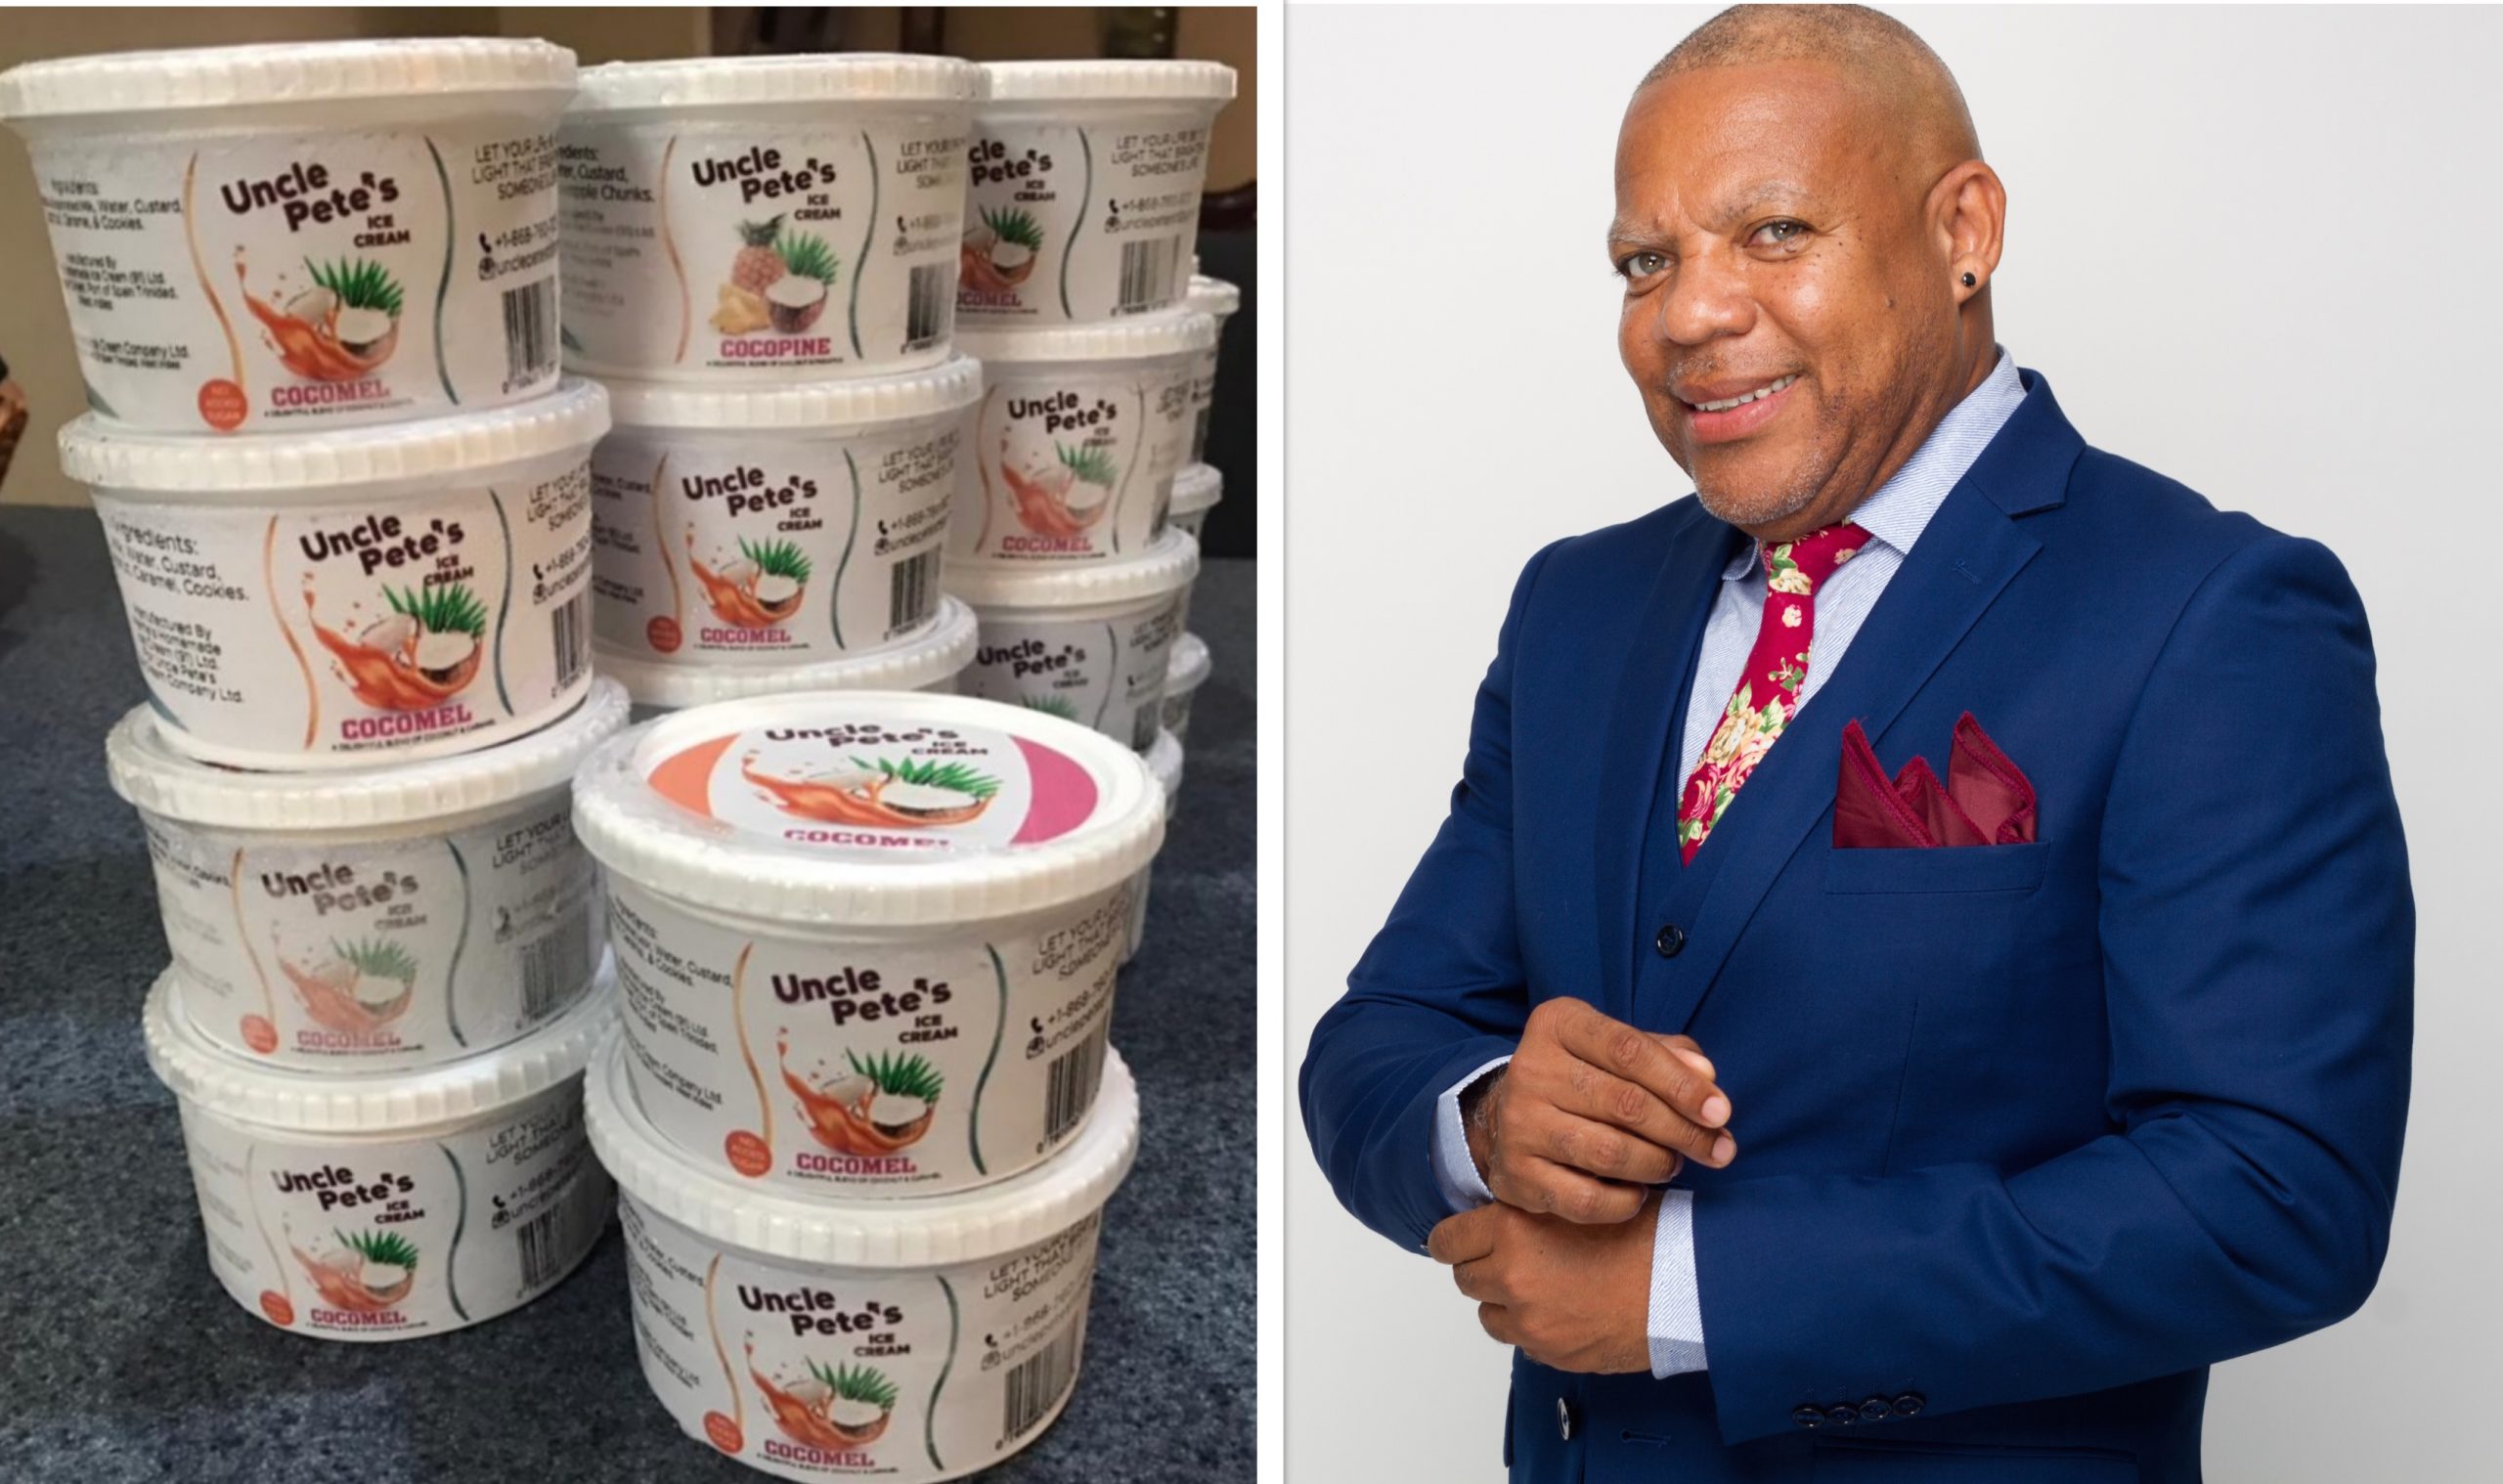 Uncle Pete’s Ice-Cream brings new flavour combinations to your tastebuds